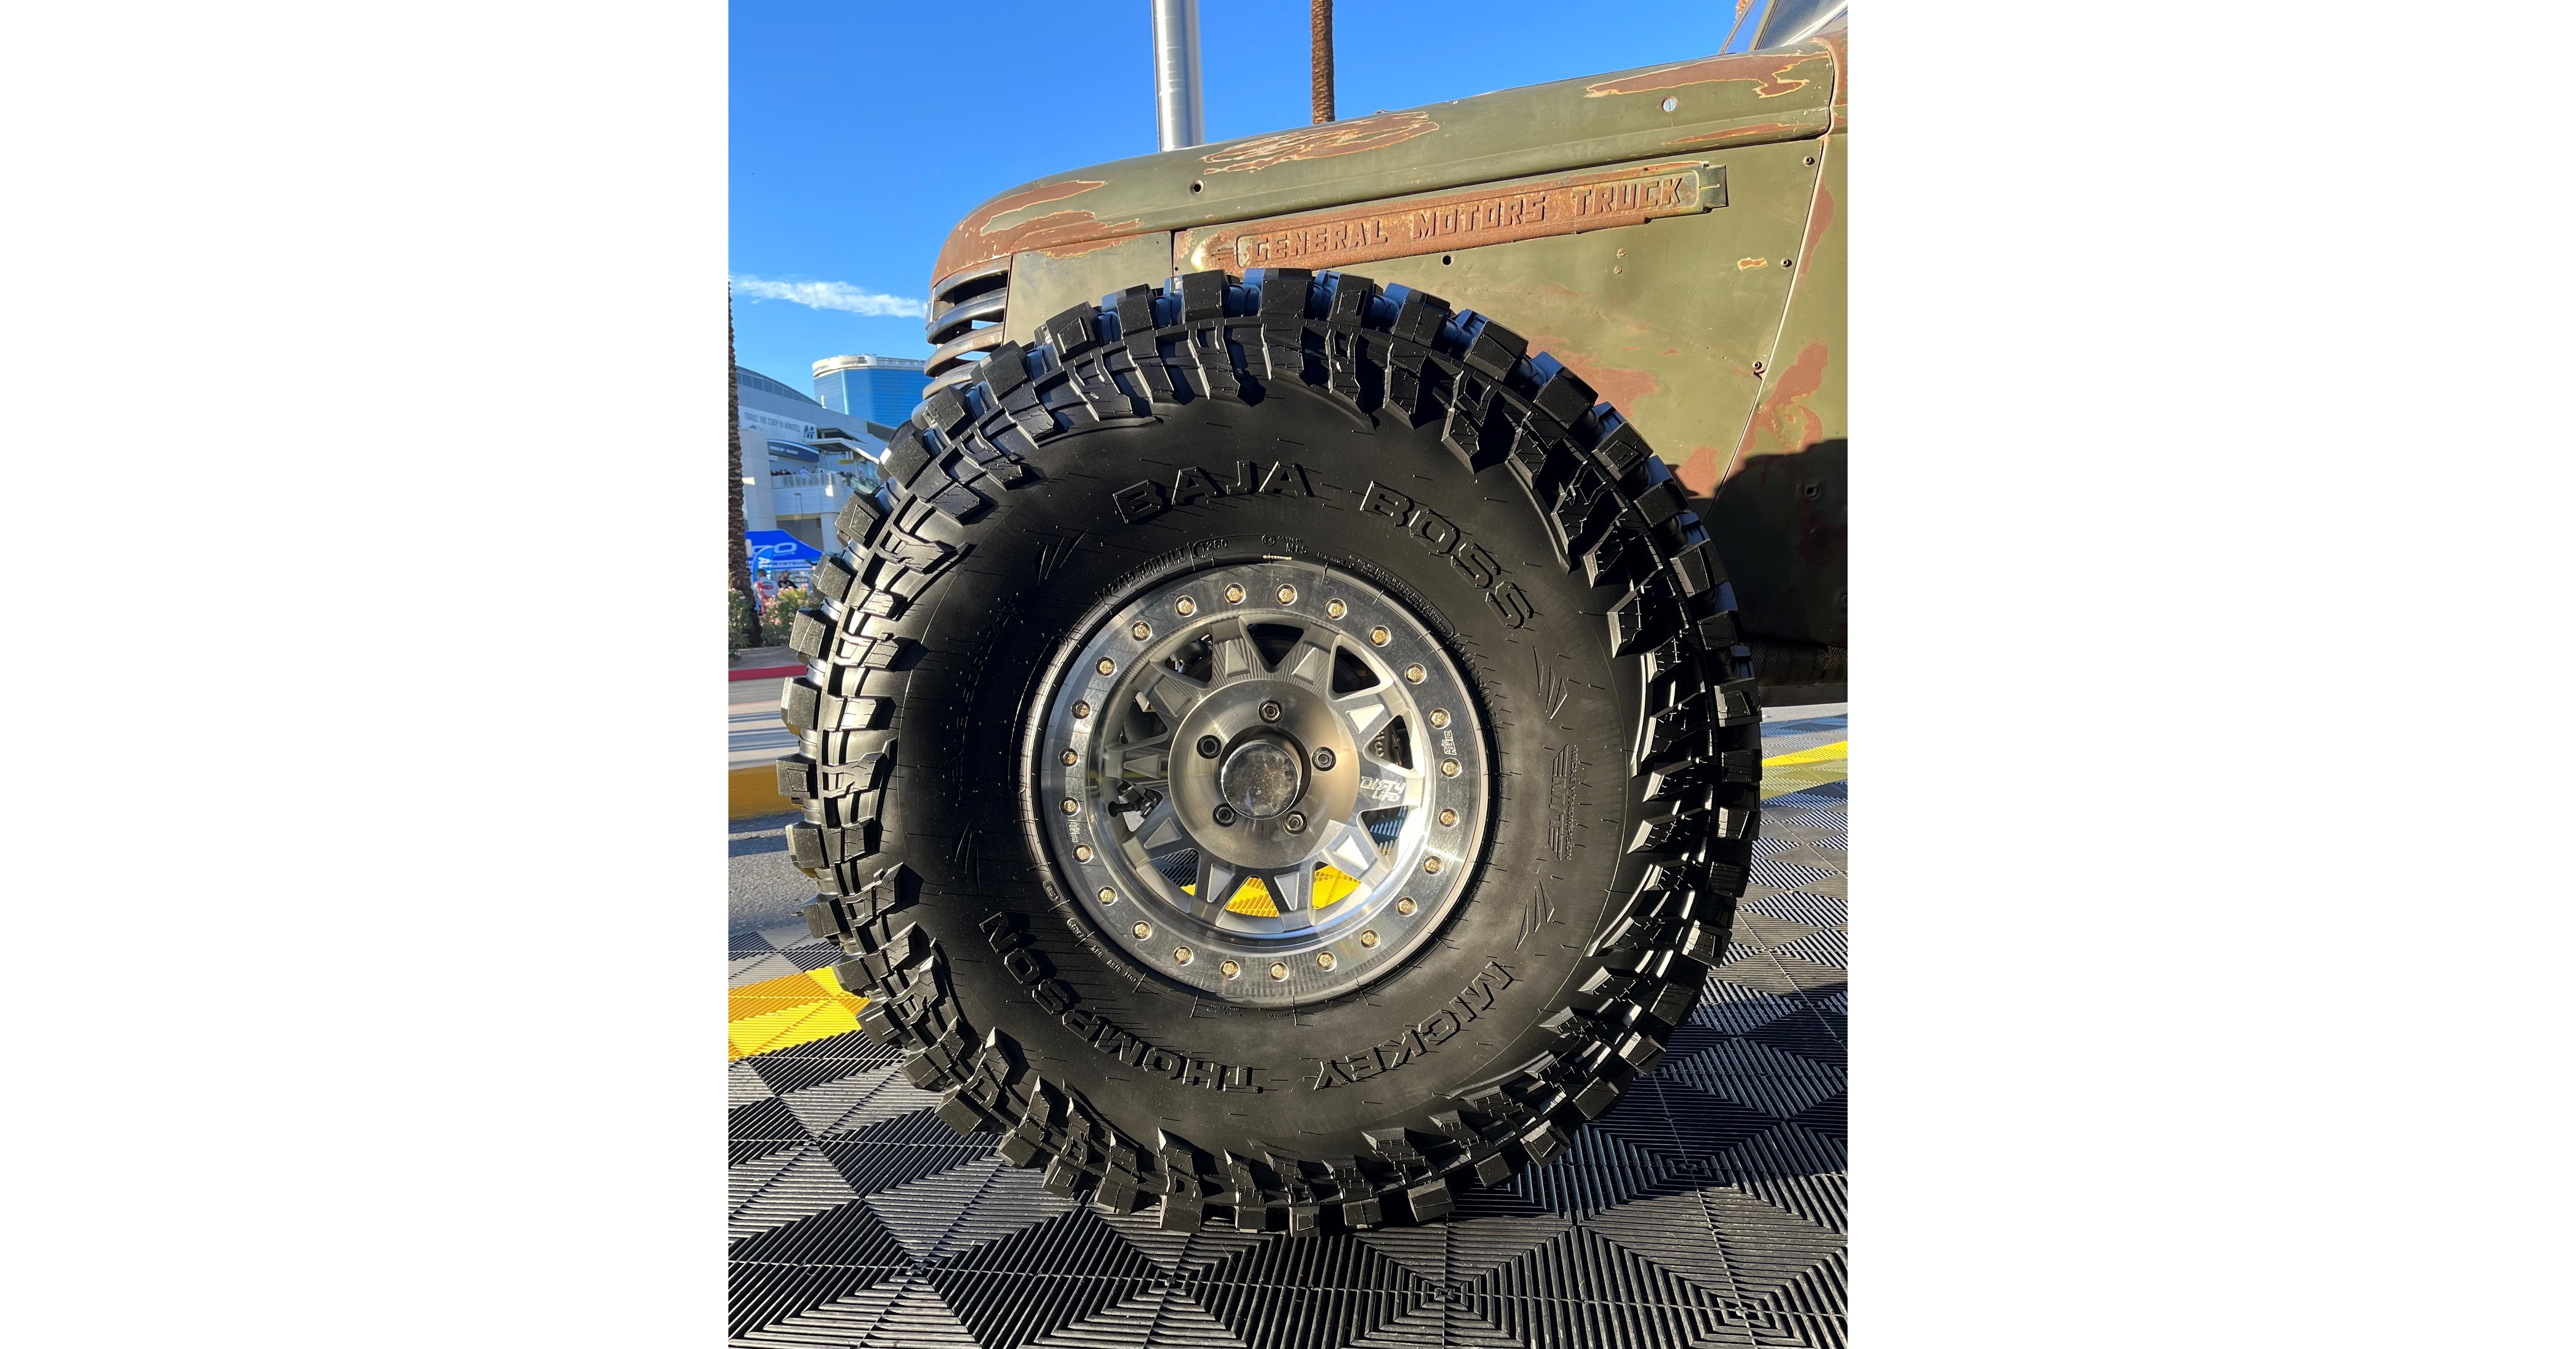 MICKEY THOMPSON ADDS BIGGEST-EVER TIRES TO ITS ULTRA PREMIUM BAJA BOSS® M/T EXTREME MUD-TERRAIN LINE